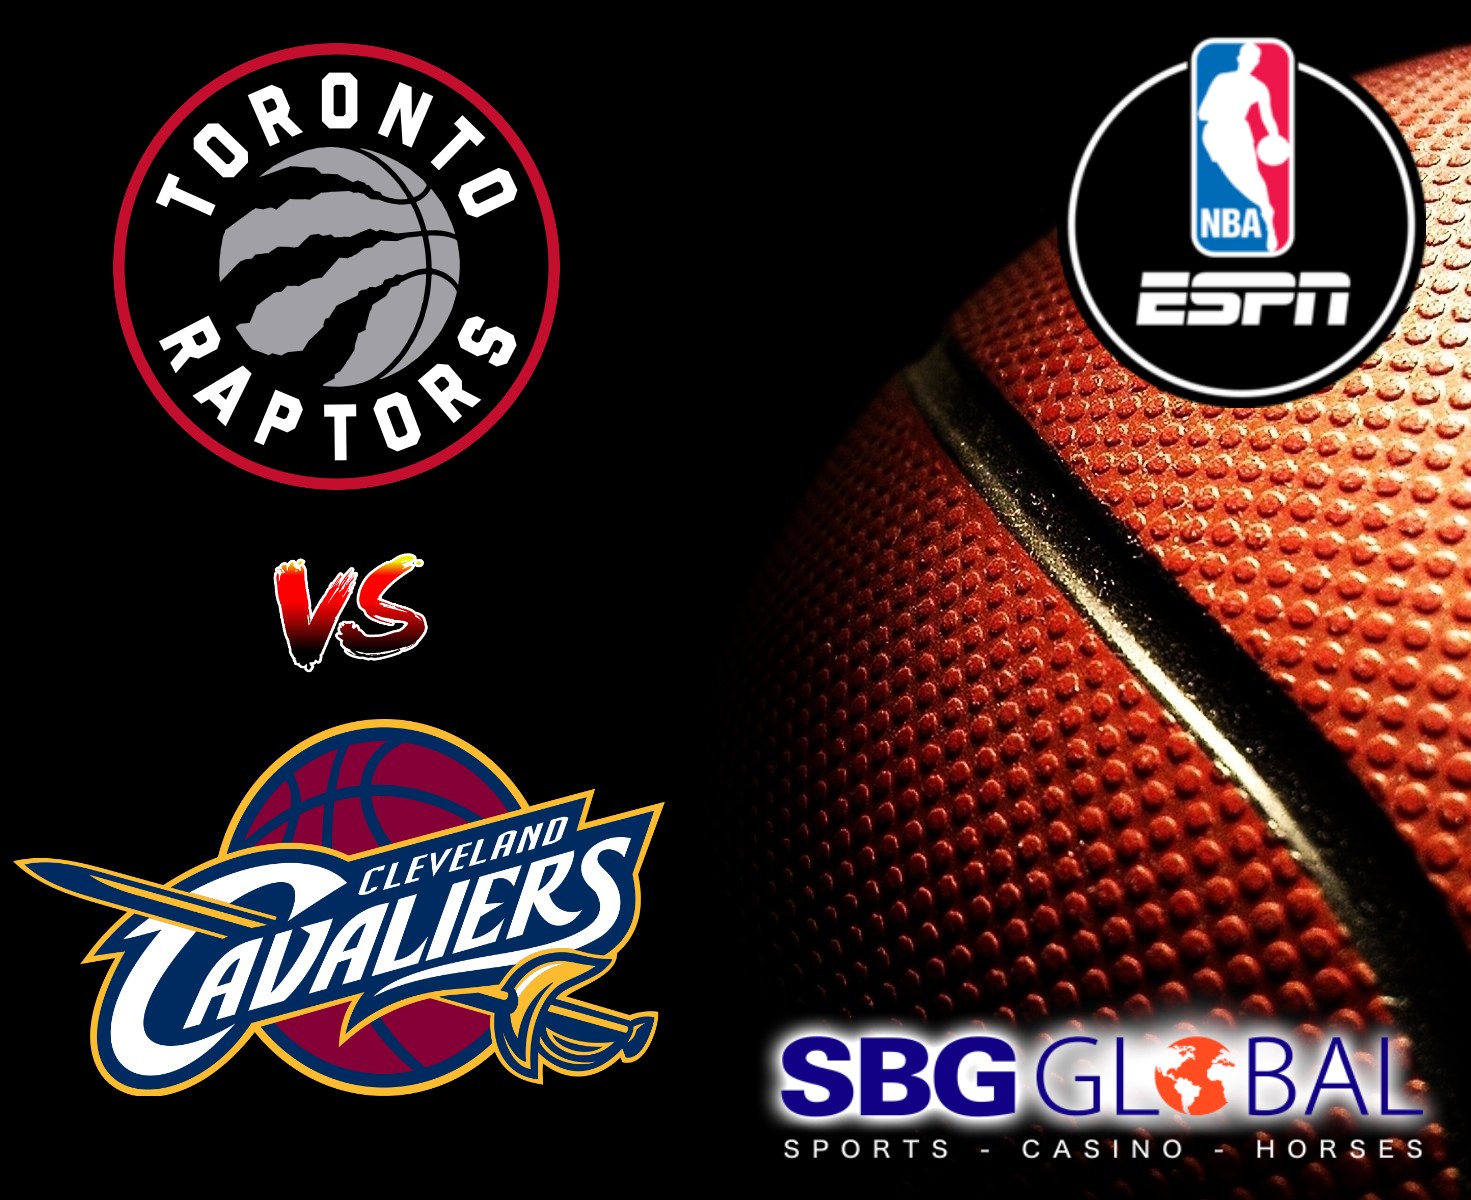 Sbg Global On Twitter The Toronto Raptors Visit Rocket Mortgage Fieldhouse To Take On The